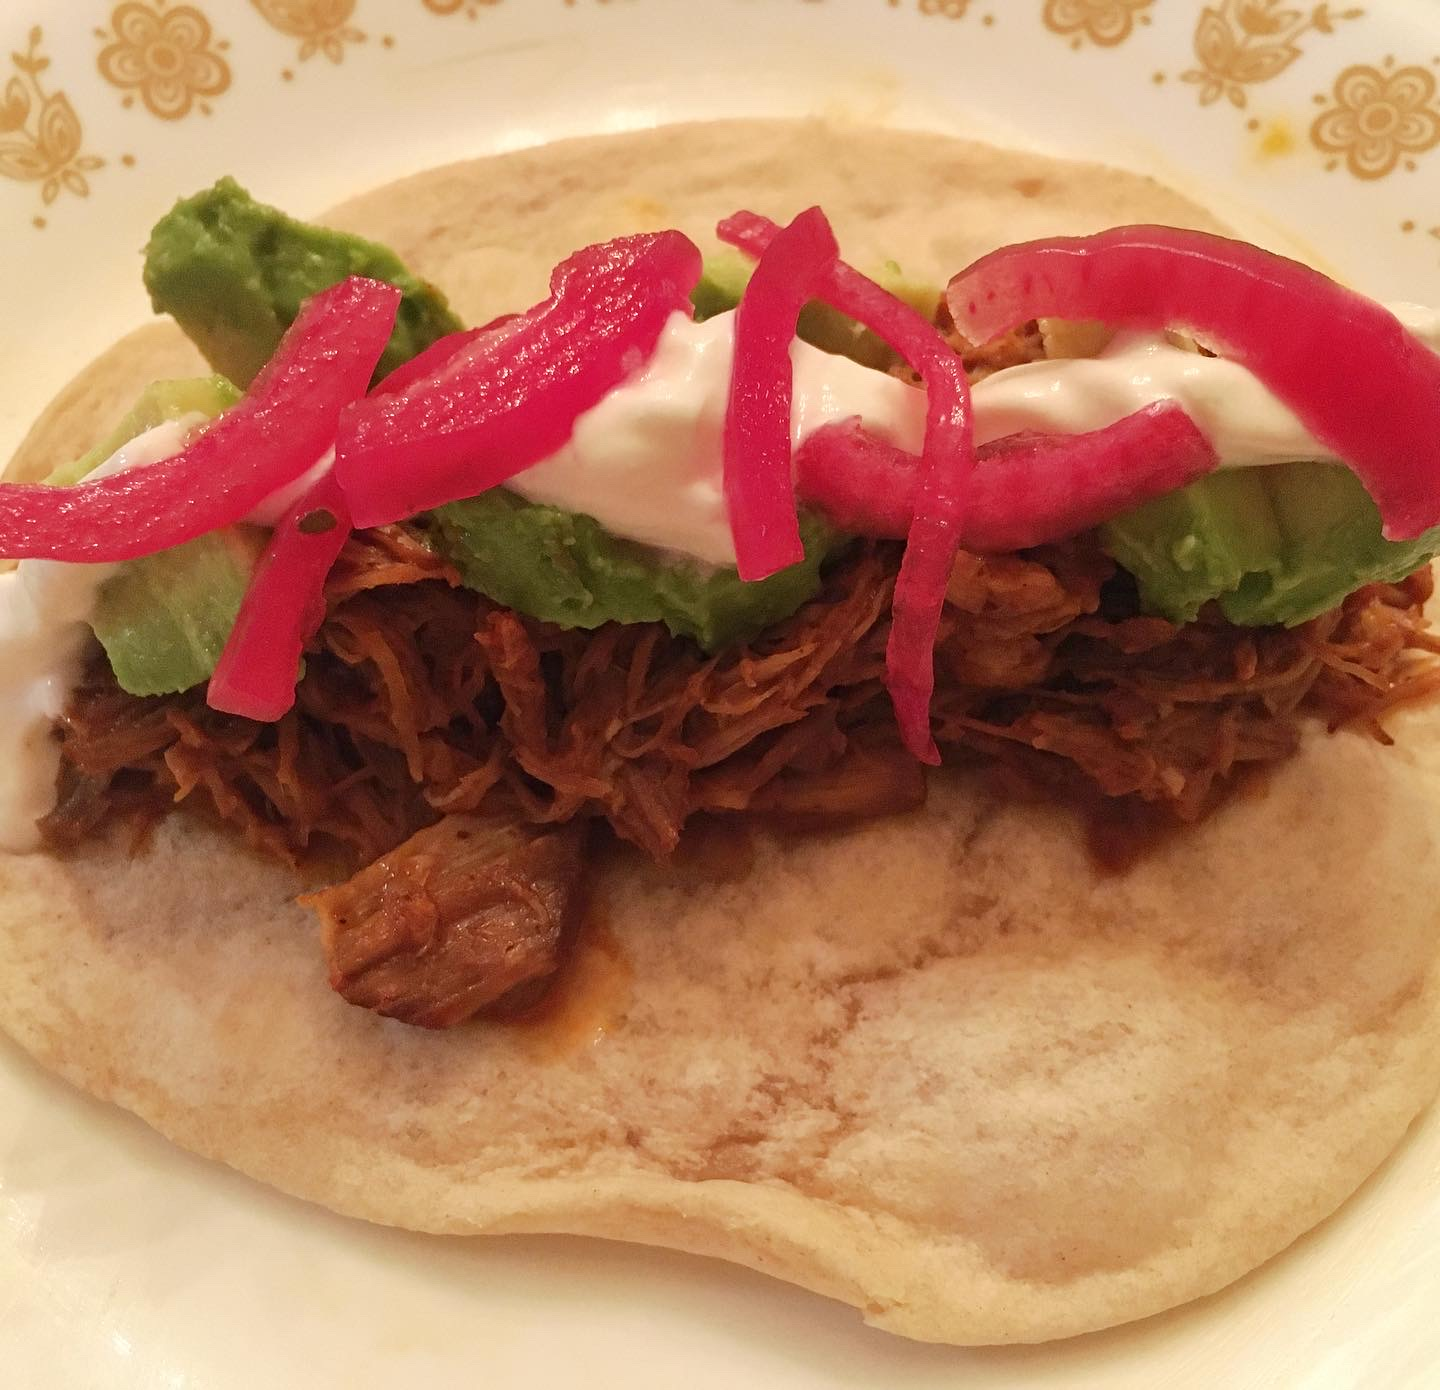 A small flour tortilla is topped with seasoned shredded pork, avocado, sour cream, and bright pink onions.